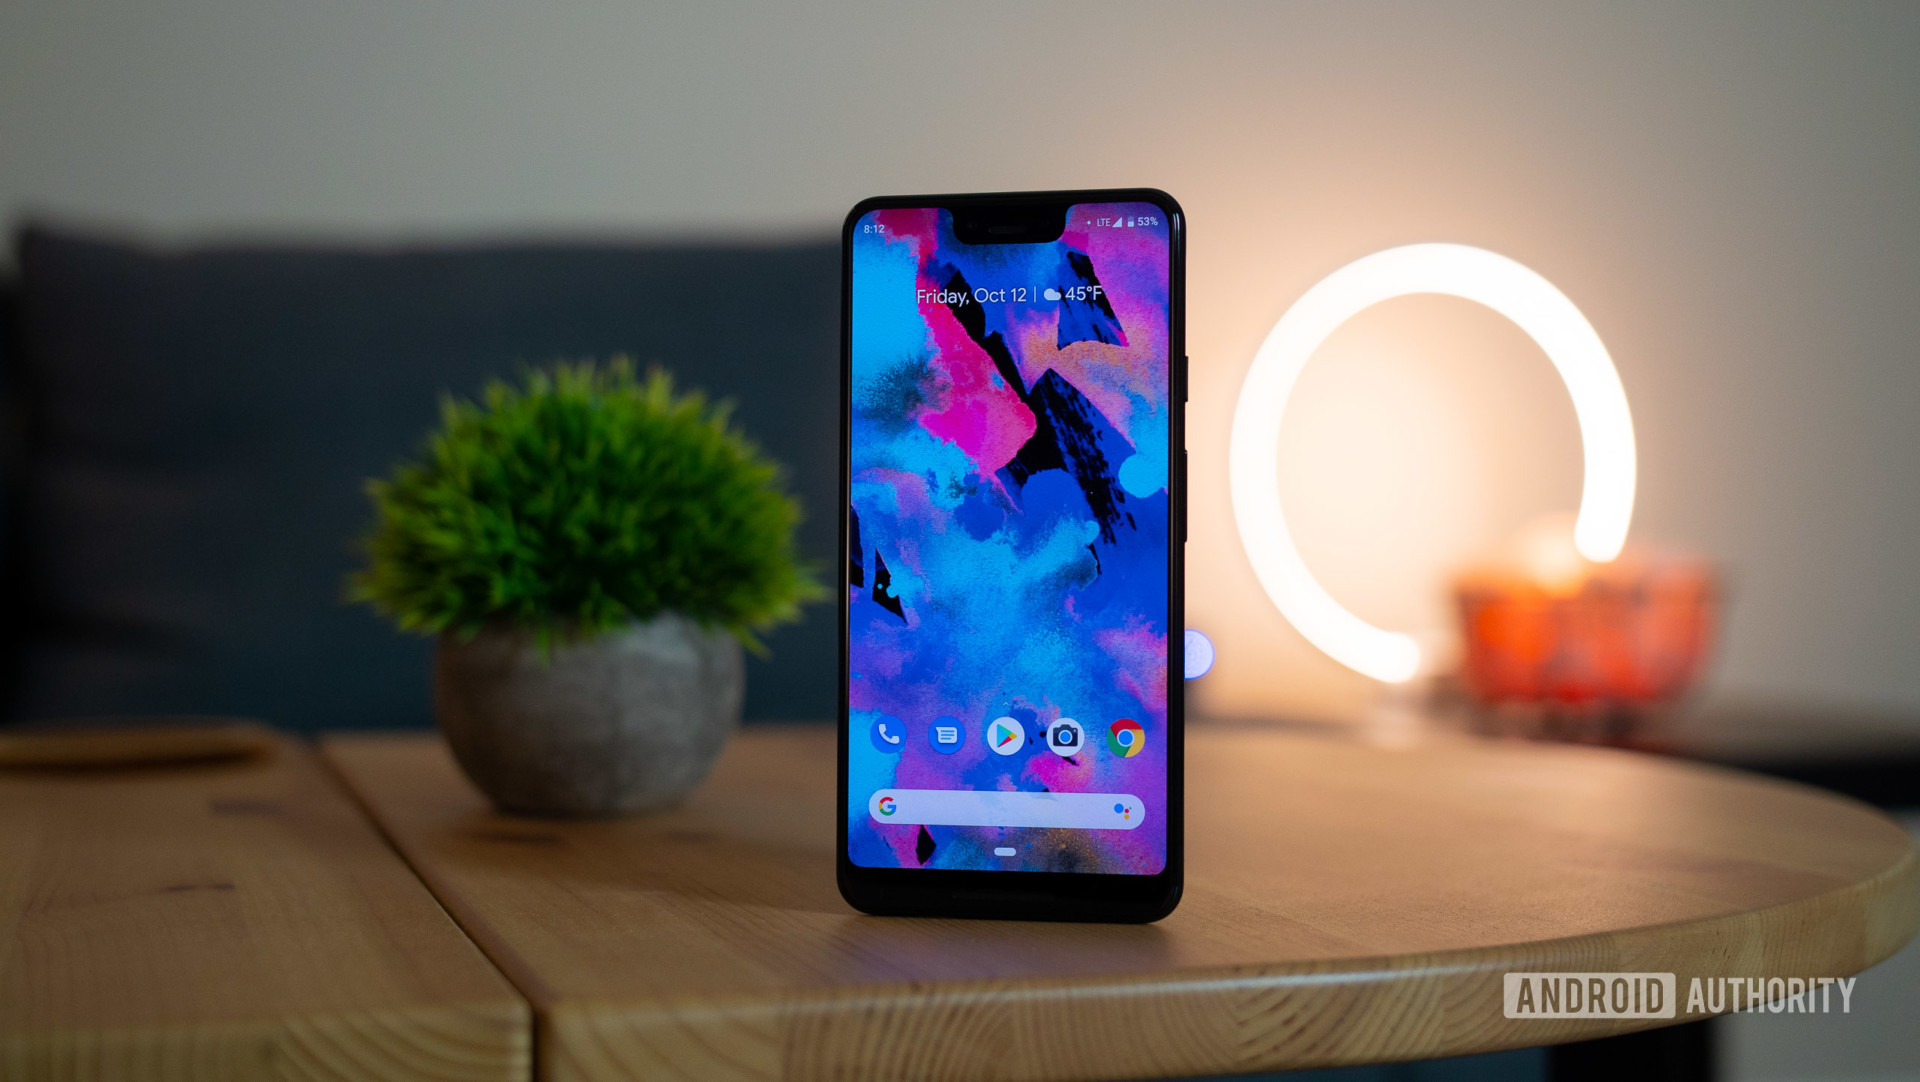 Some Google Pixel 3 XL users are reporting issues with Android 10.